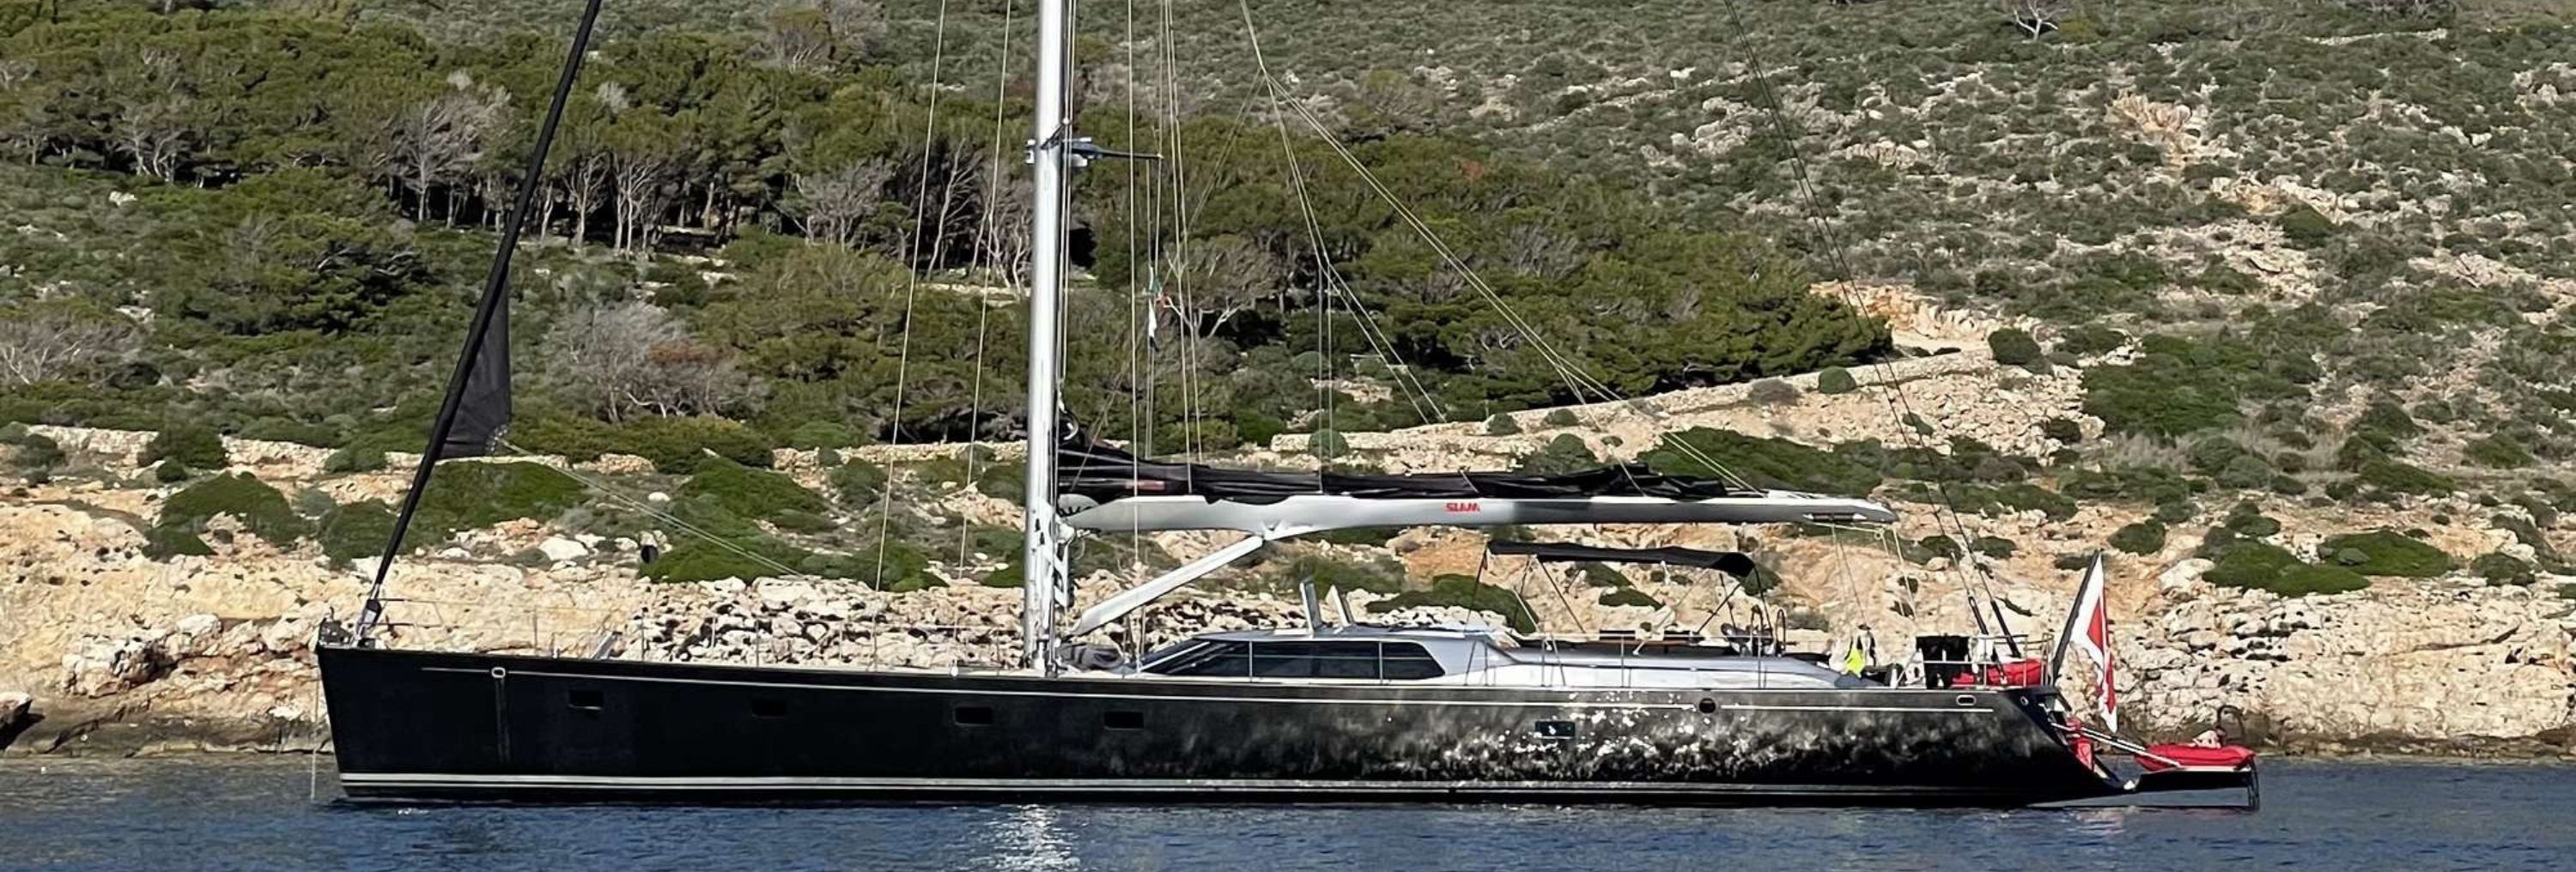 FREE AT LAST: New Sailing Yacht available for charter